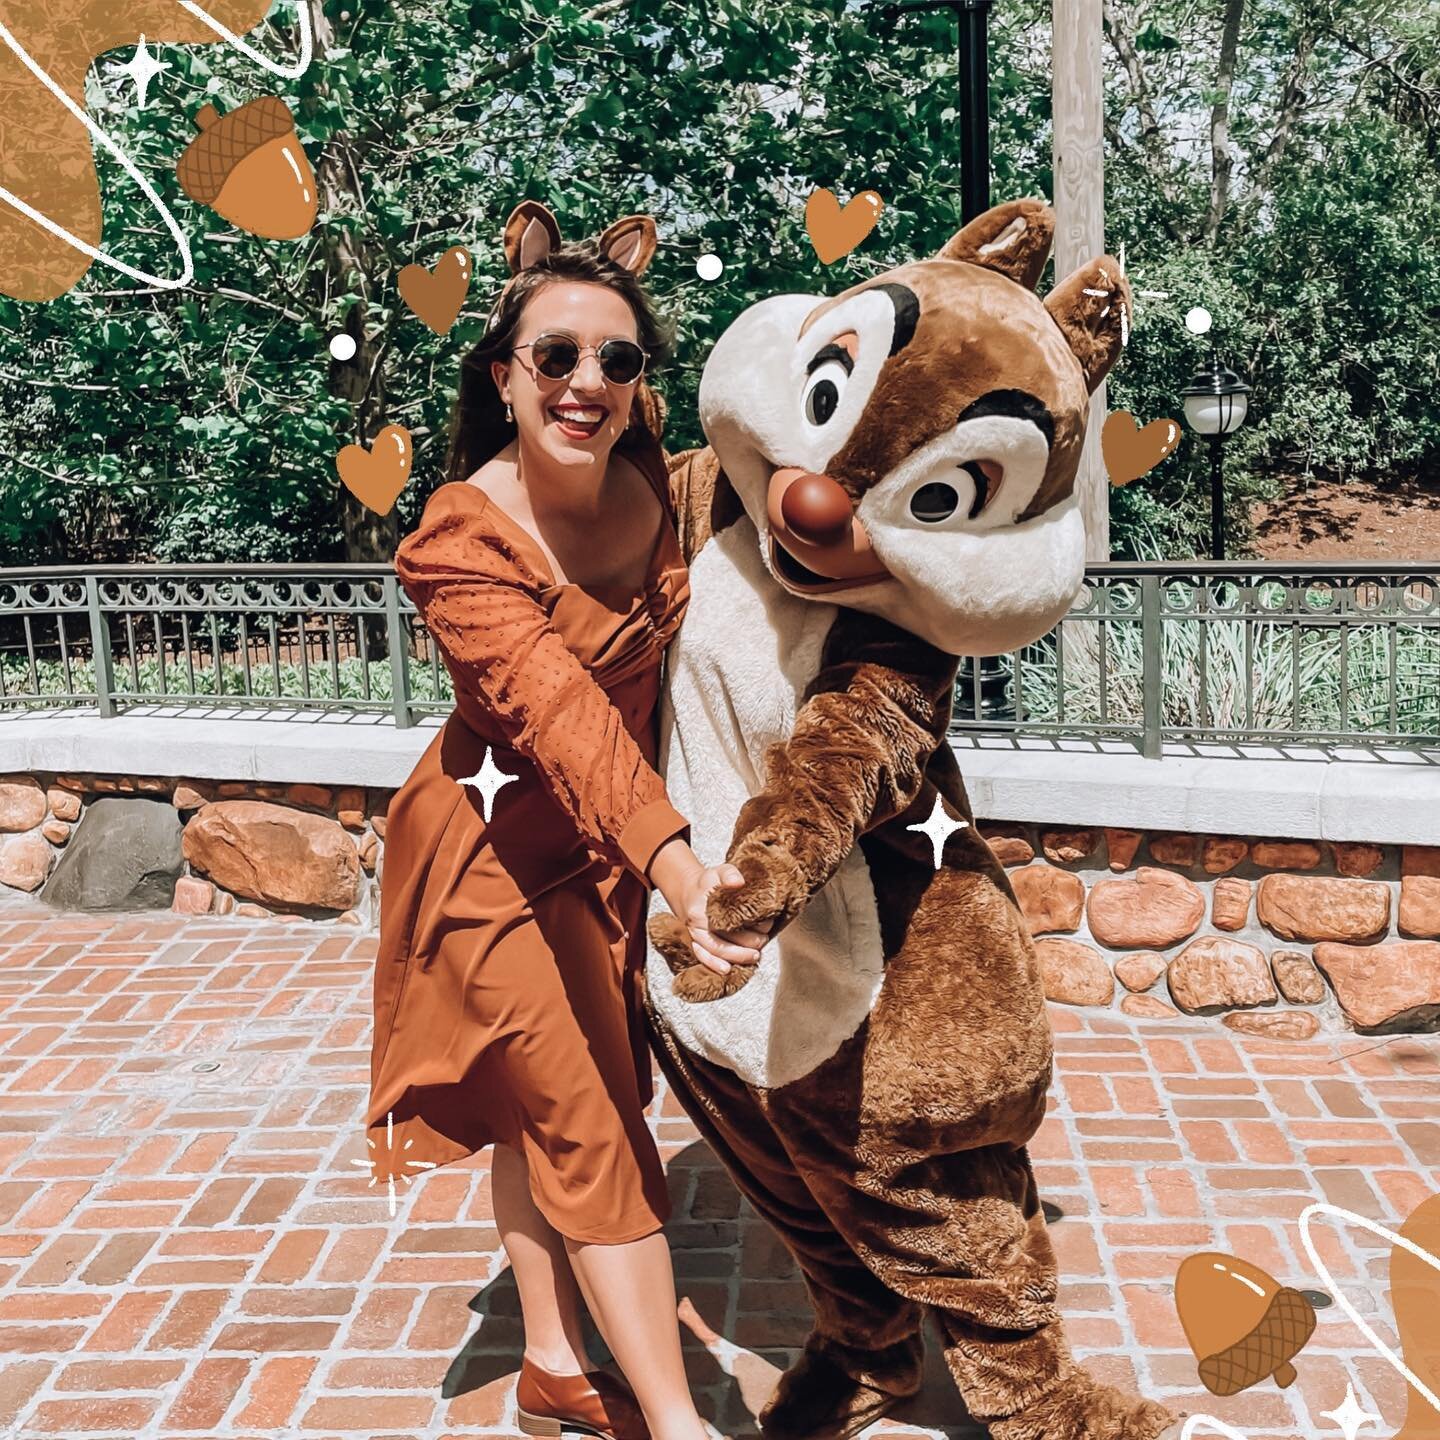 Dale and I - we&rsquo;re double trouble 🐿️💕✨ Dapper Day: Day 2 melted my heart 😭💕 One request I had with @spencerfinds was to be Chip and Dale for dapper day - so we thought it was fitting for Magic Kingdom 🥹💕 We had a very special meet and gre